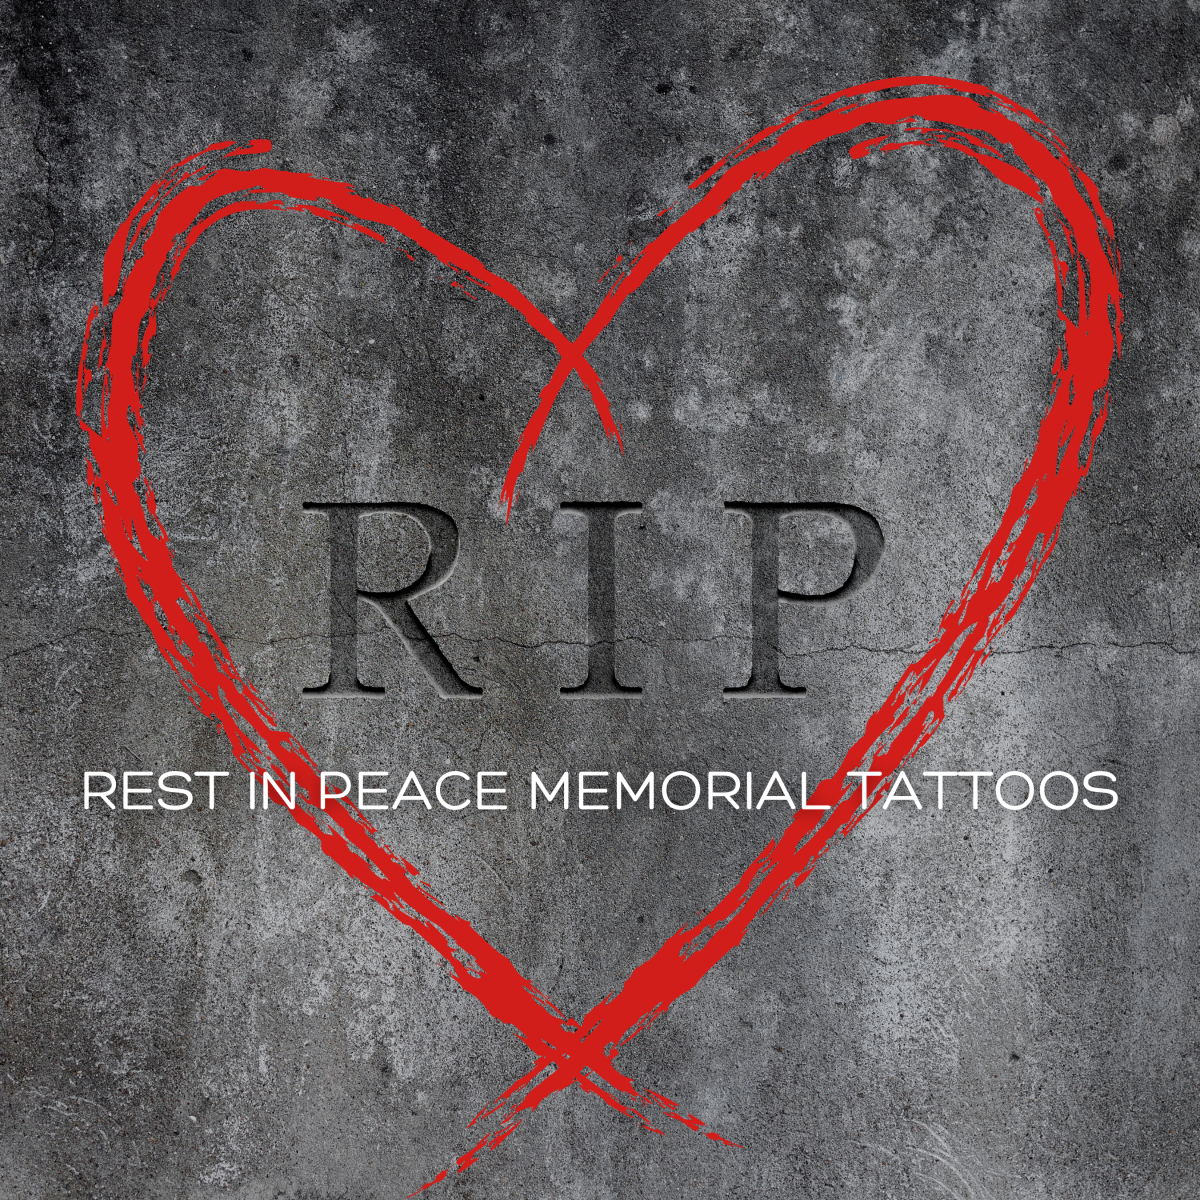 Rest In Peace (.) Memorial Tattoos: Design Ideas, Symbols, and Meanings  - TatRing